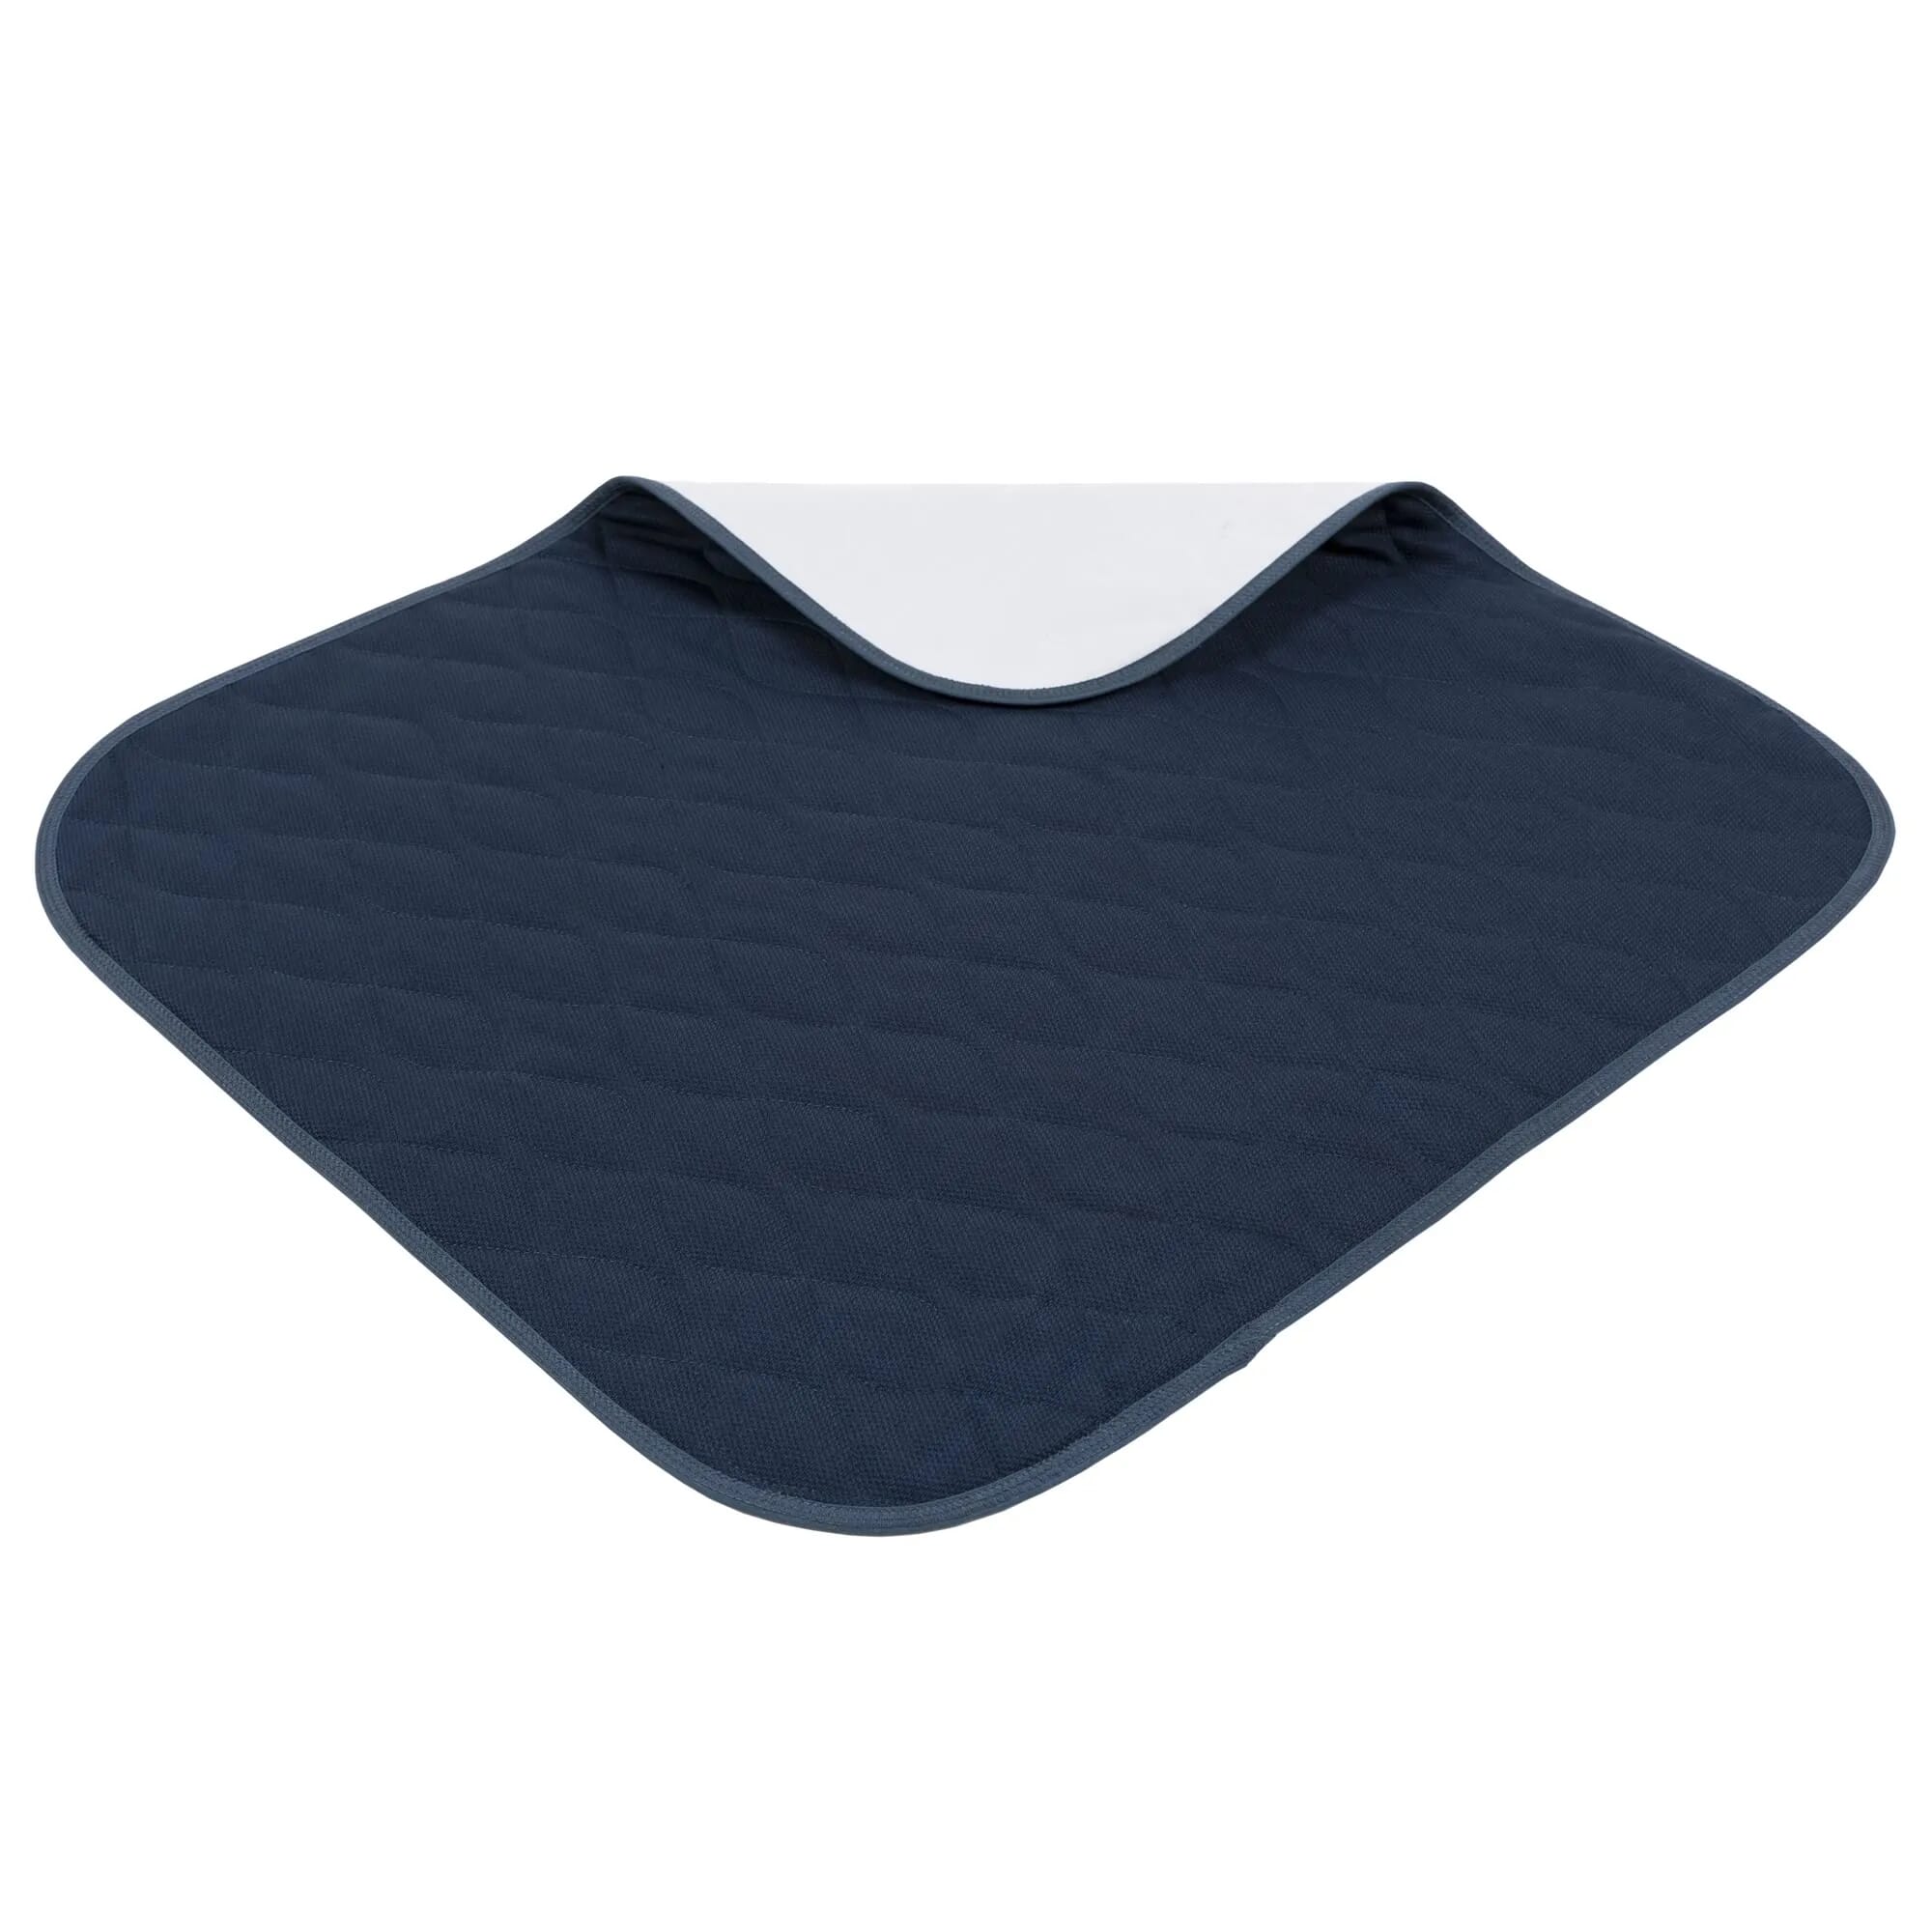 View Washable Chair Pads Blue information